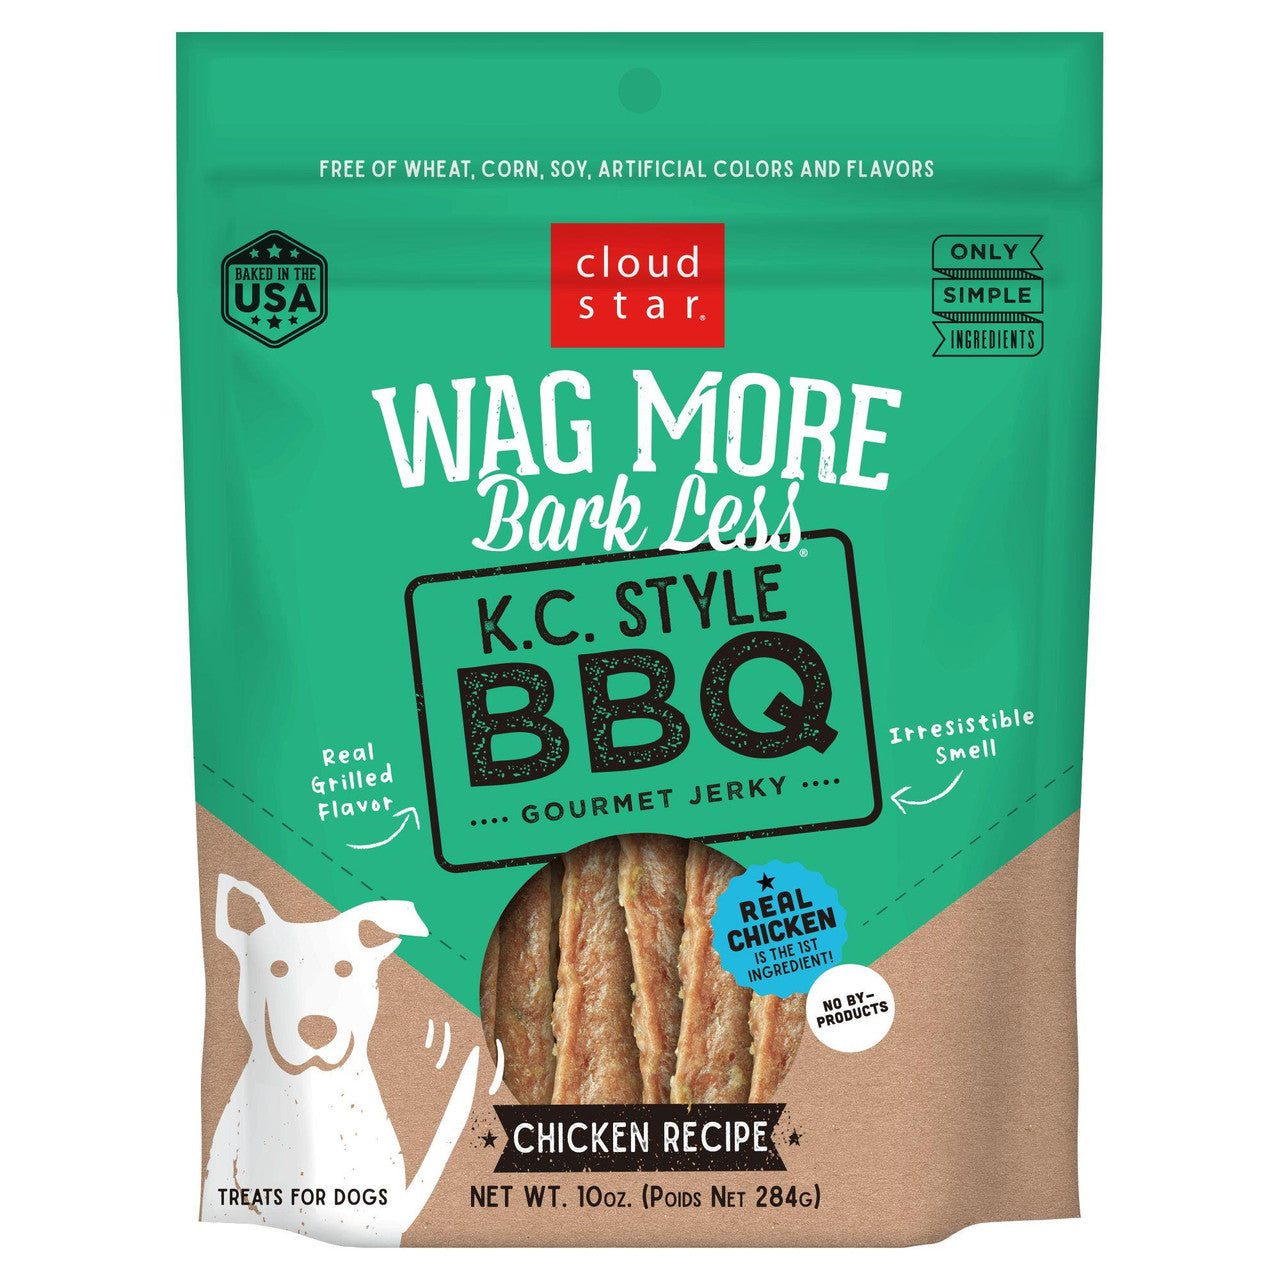 Wag More Bark Less Kansas City Style BBQ Chicken Grilled Jerky 10 oz 693804191236